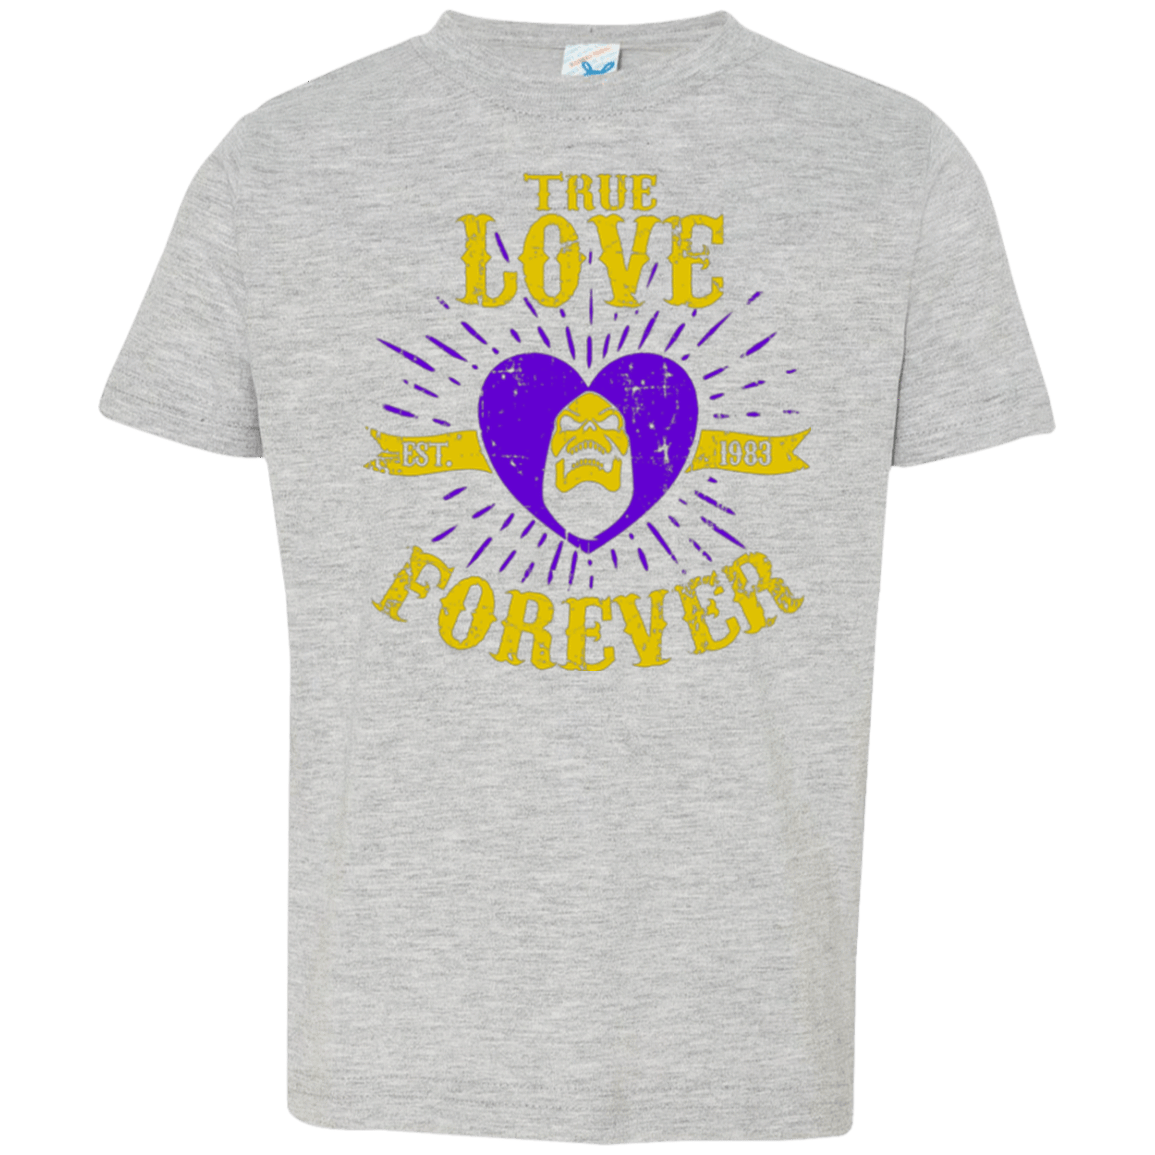 T-Shirts Heather / 2T True Love Forever Masters Toddler Premium T-Shirt